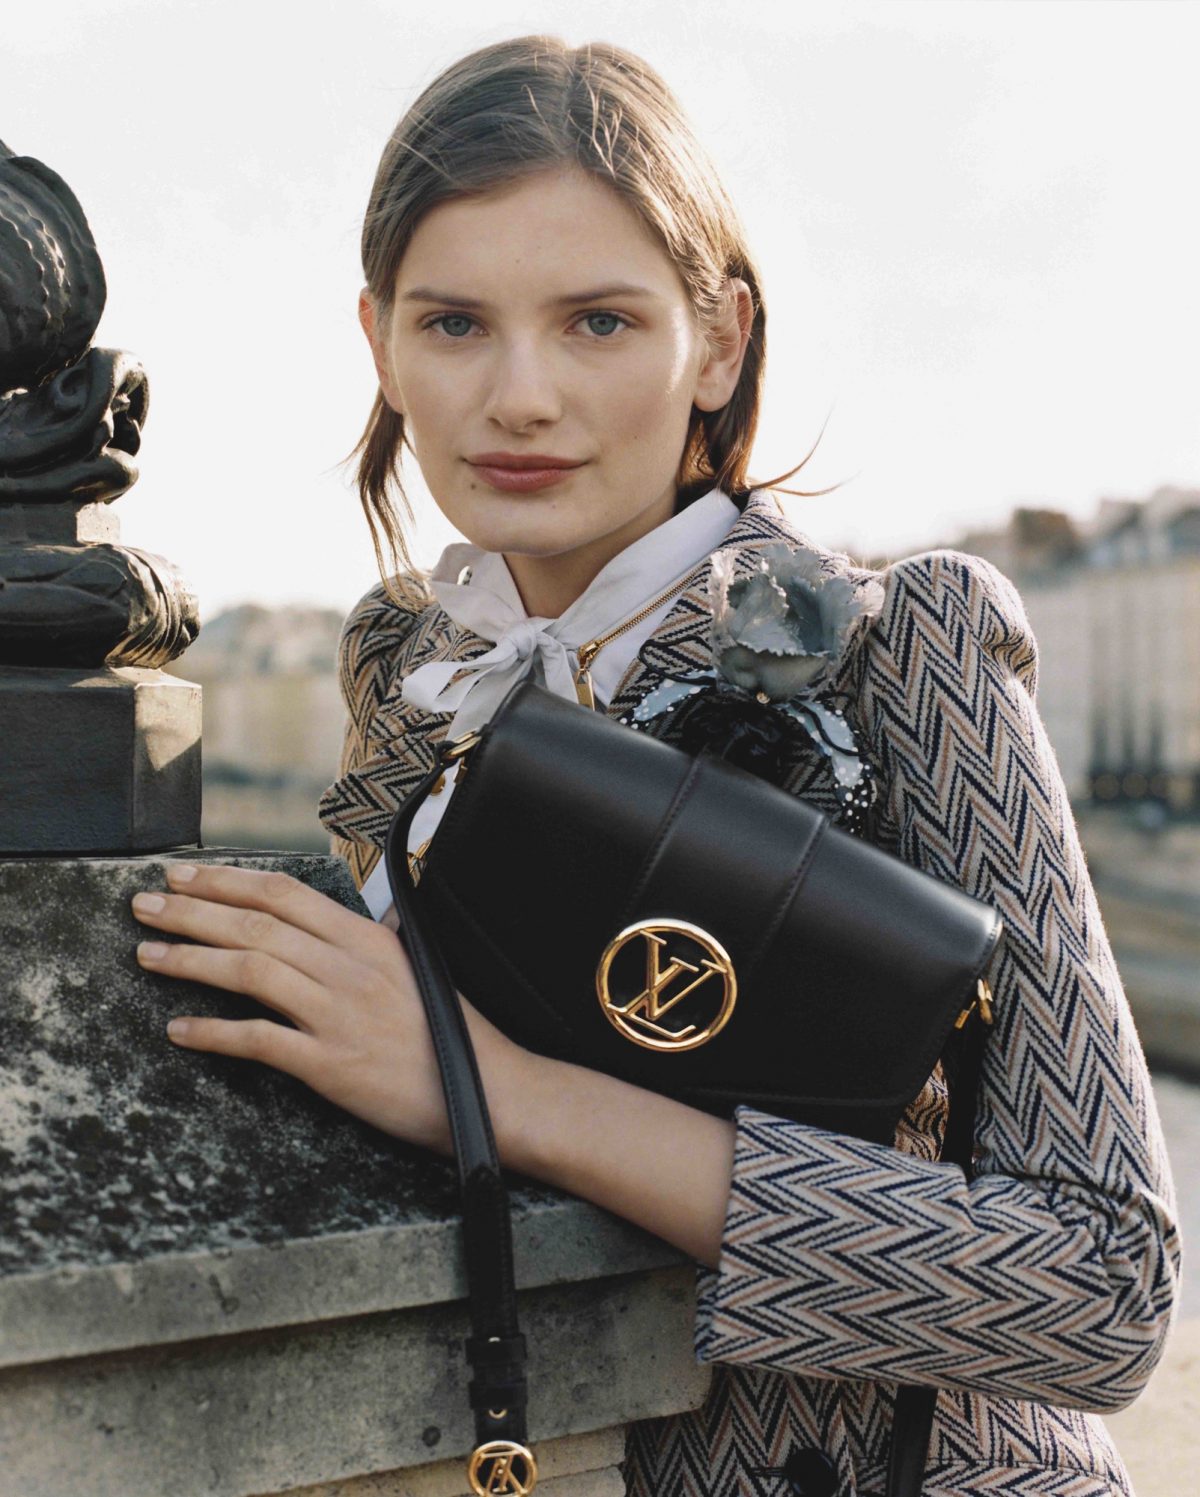 The Louis Vuitton Pont 9 is the shoulder bag we have been waiting for -  Luxurylaunches